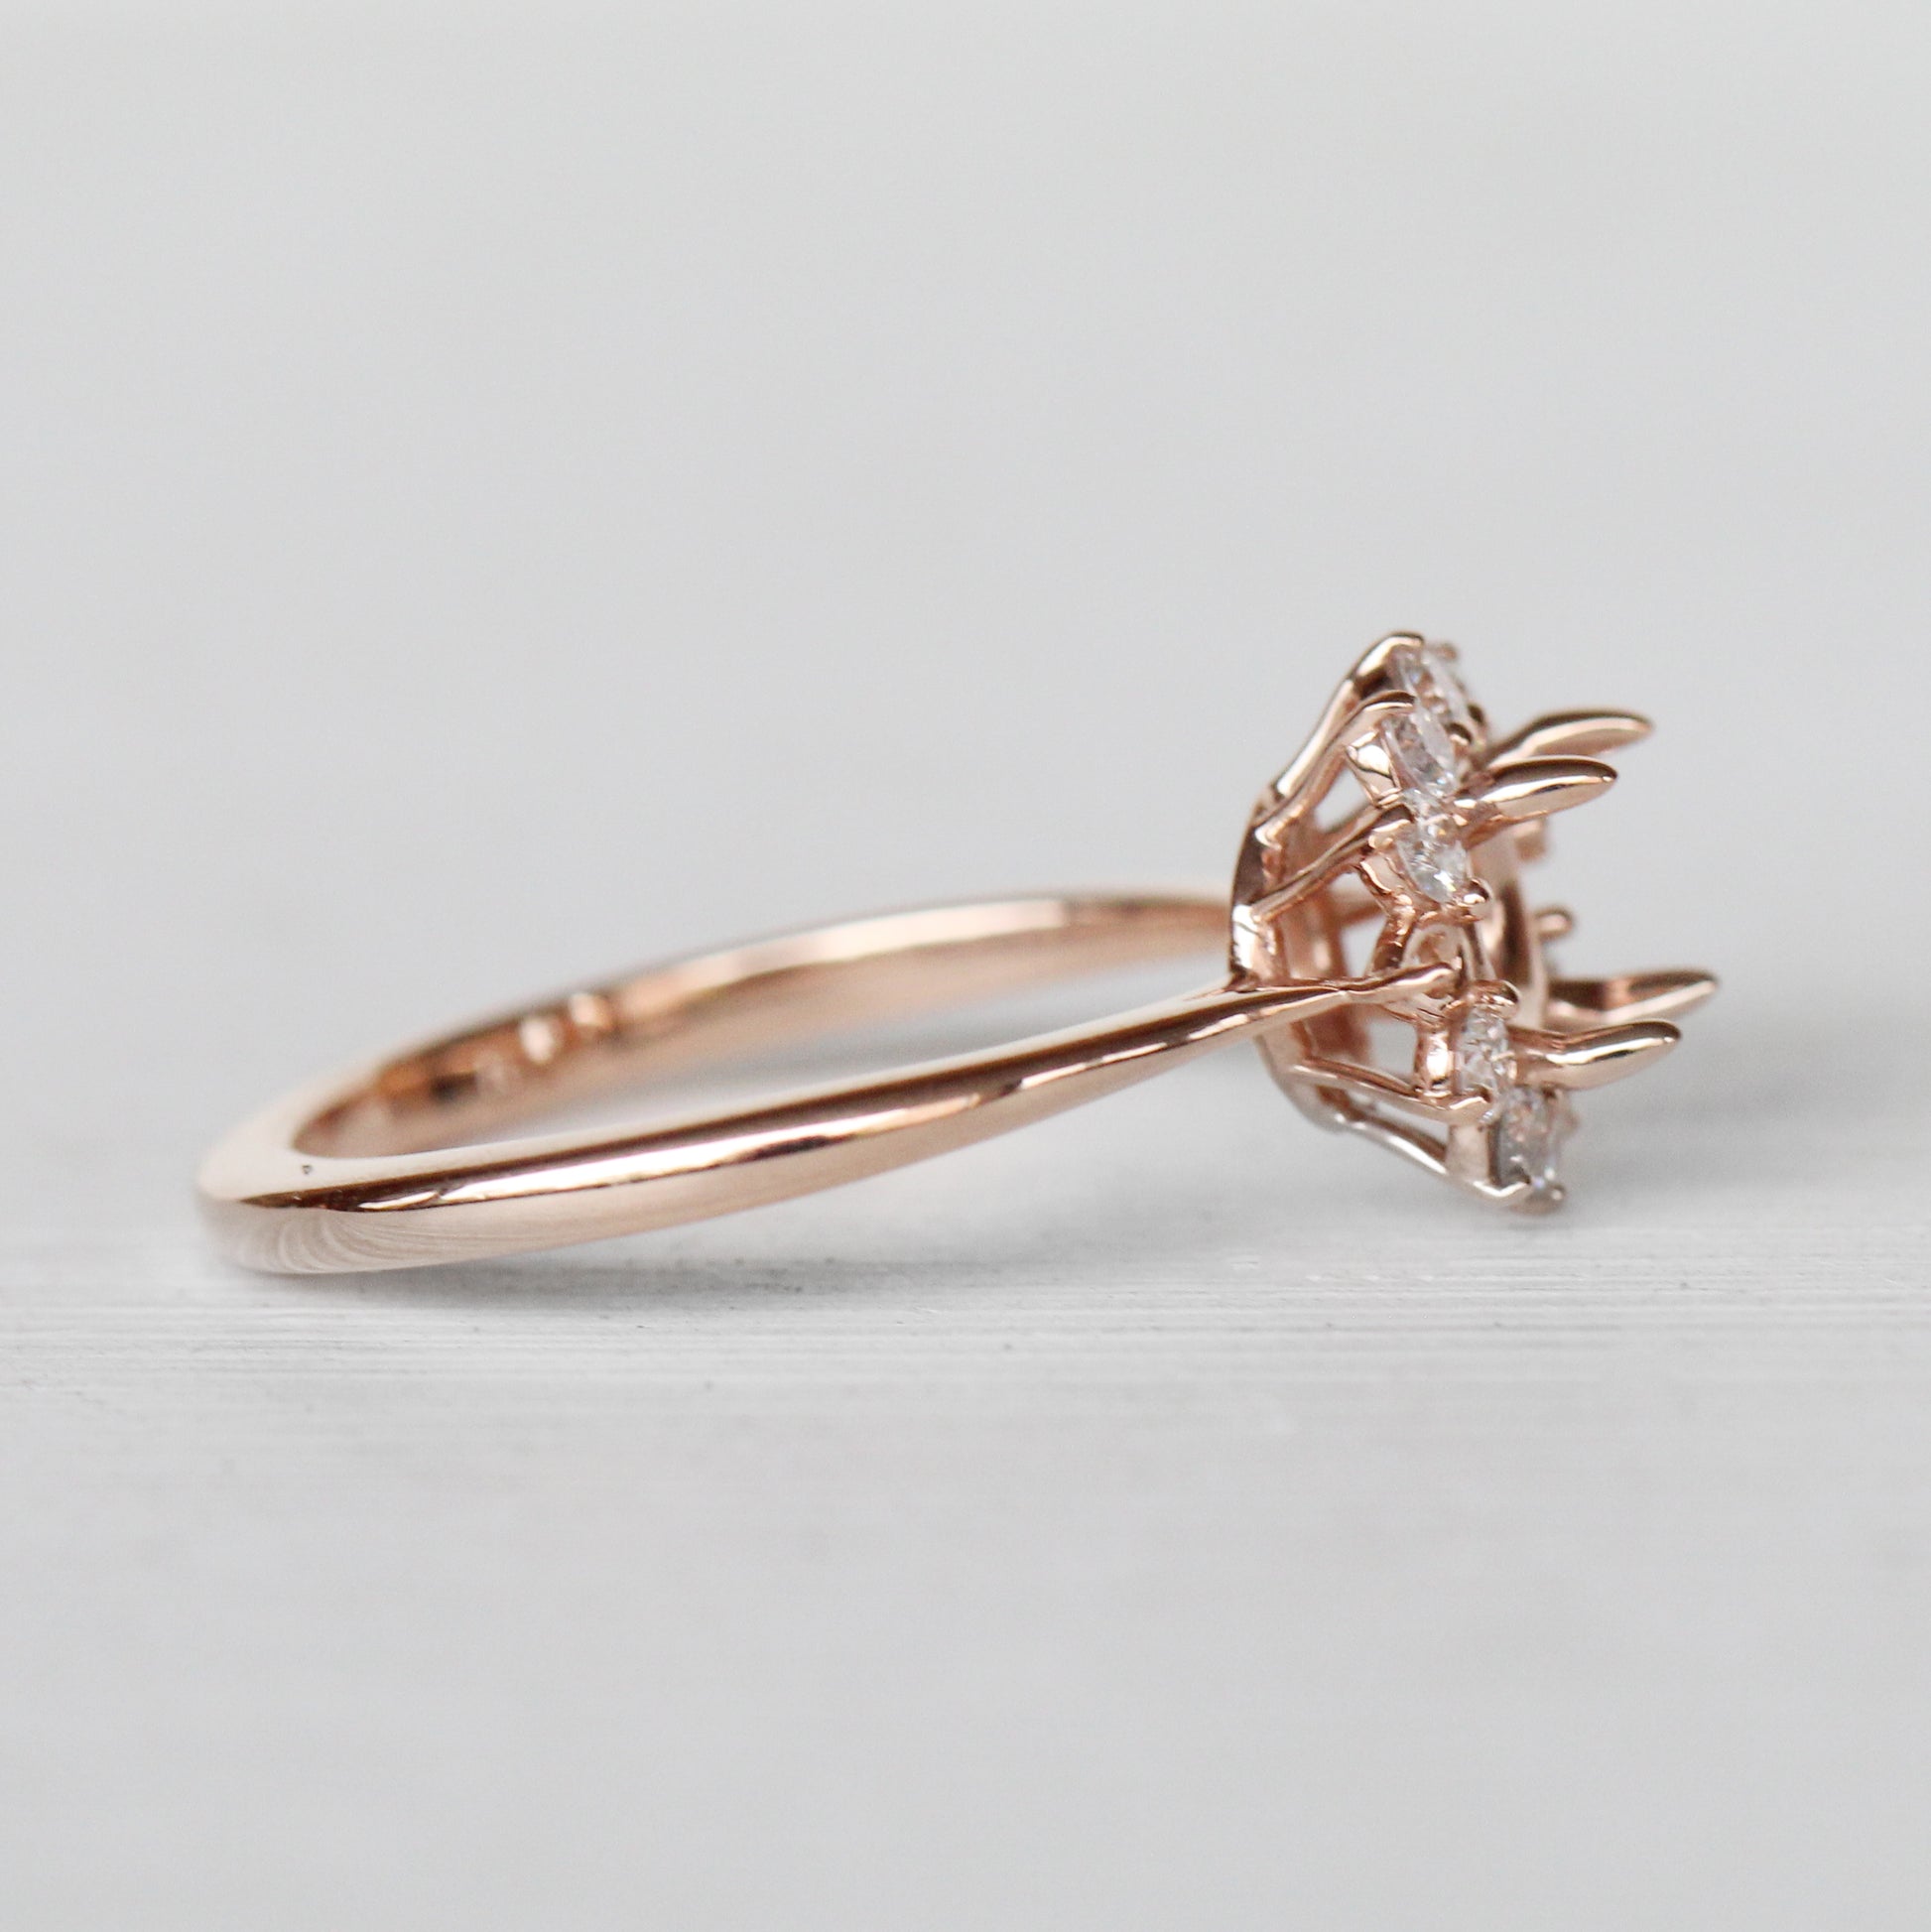 Dahlia Setting - Midwinter Co. Alternative Bridal Rings and Modern Fine Jewelry